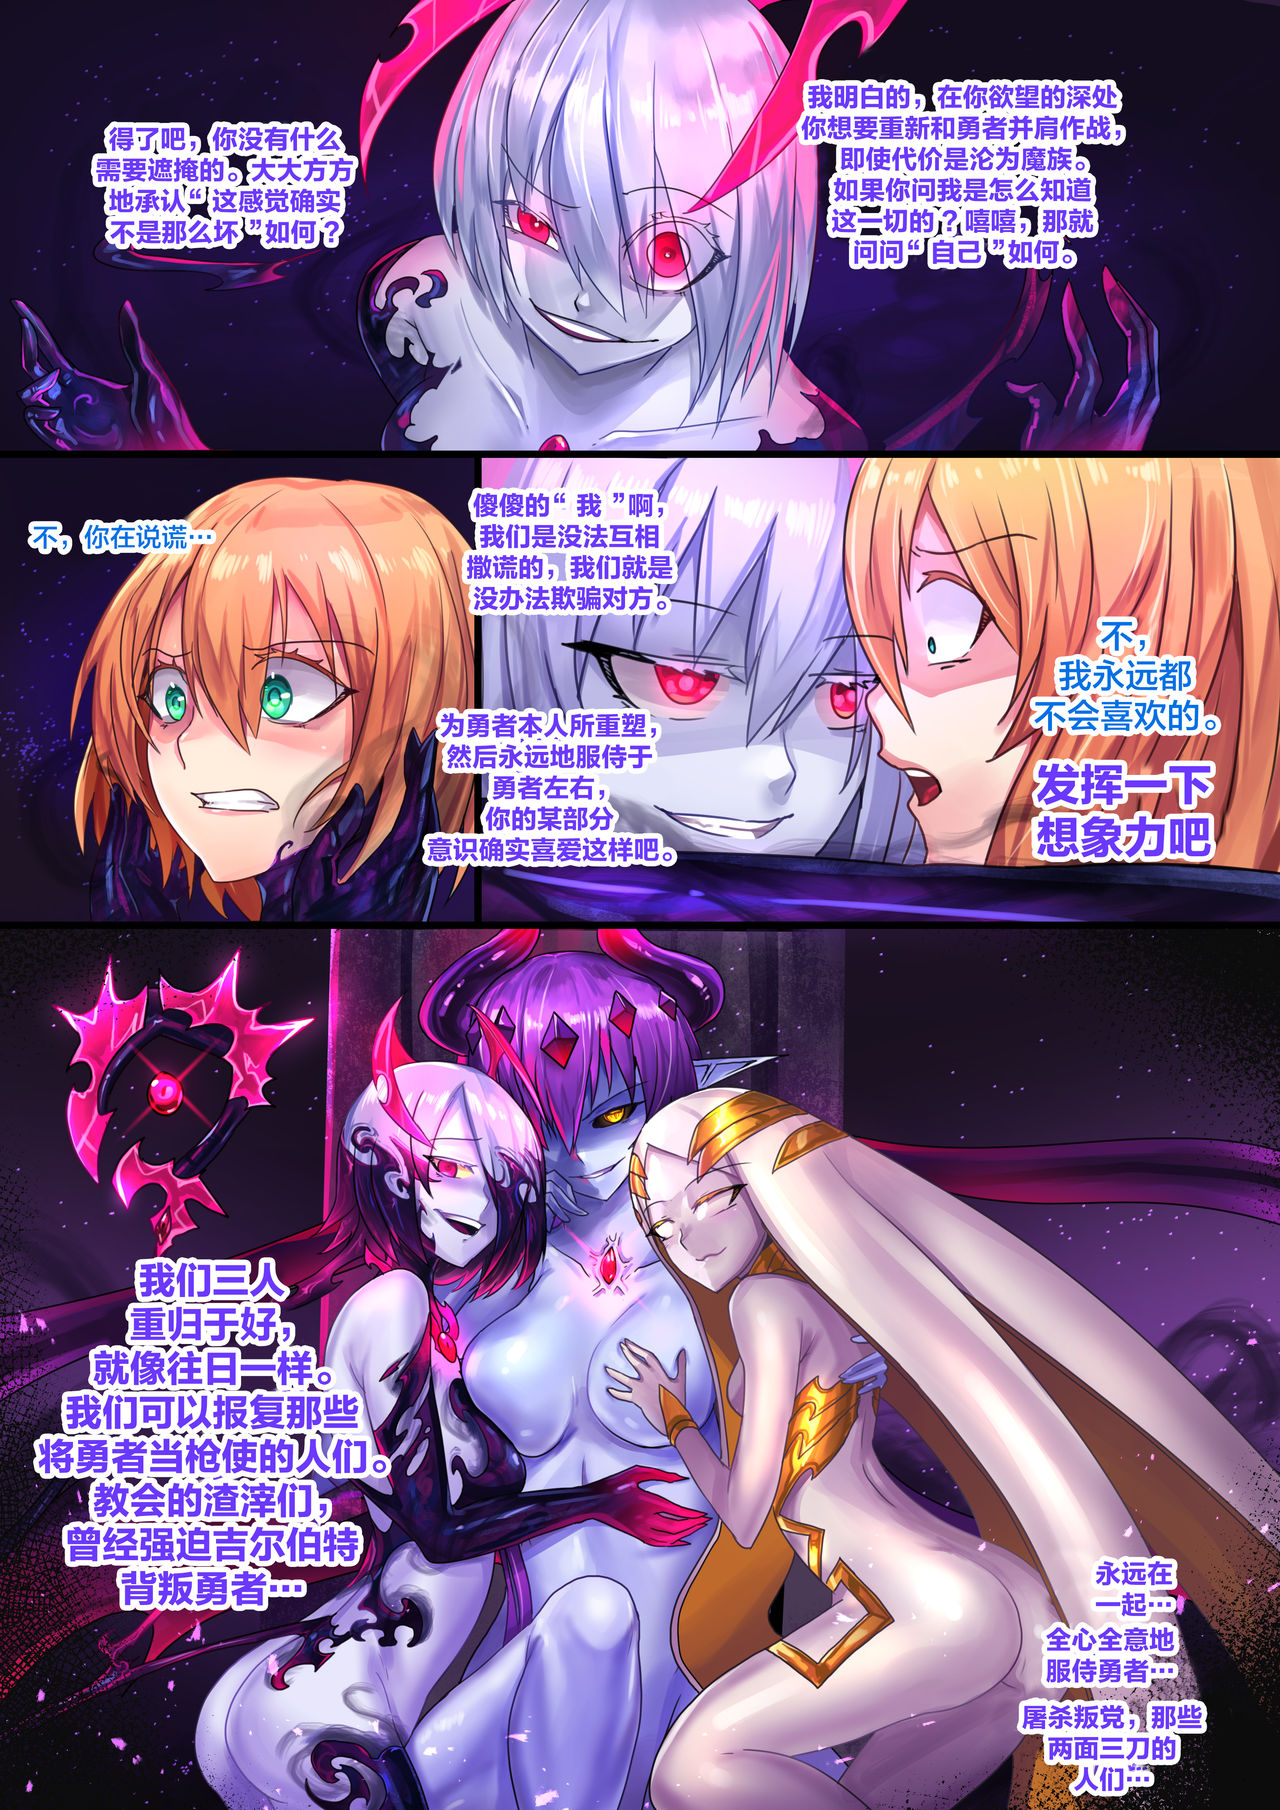 [ibenz009] Demon lord Chapter 2 [Chinese] [不咕鸟汉化组] [ibenz009] Demon lord Chapter 2 [中国翻訳]